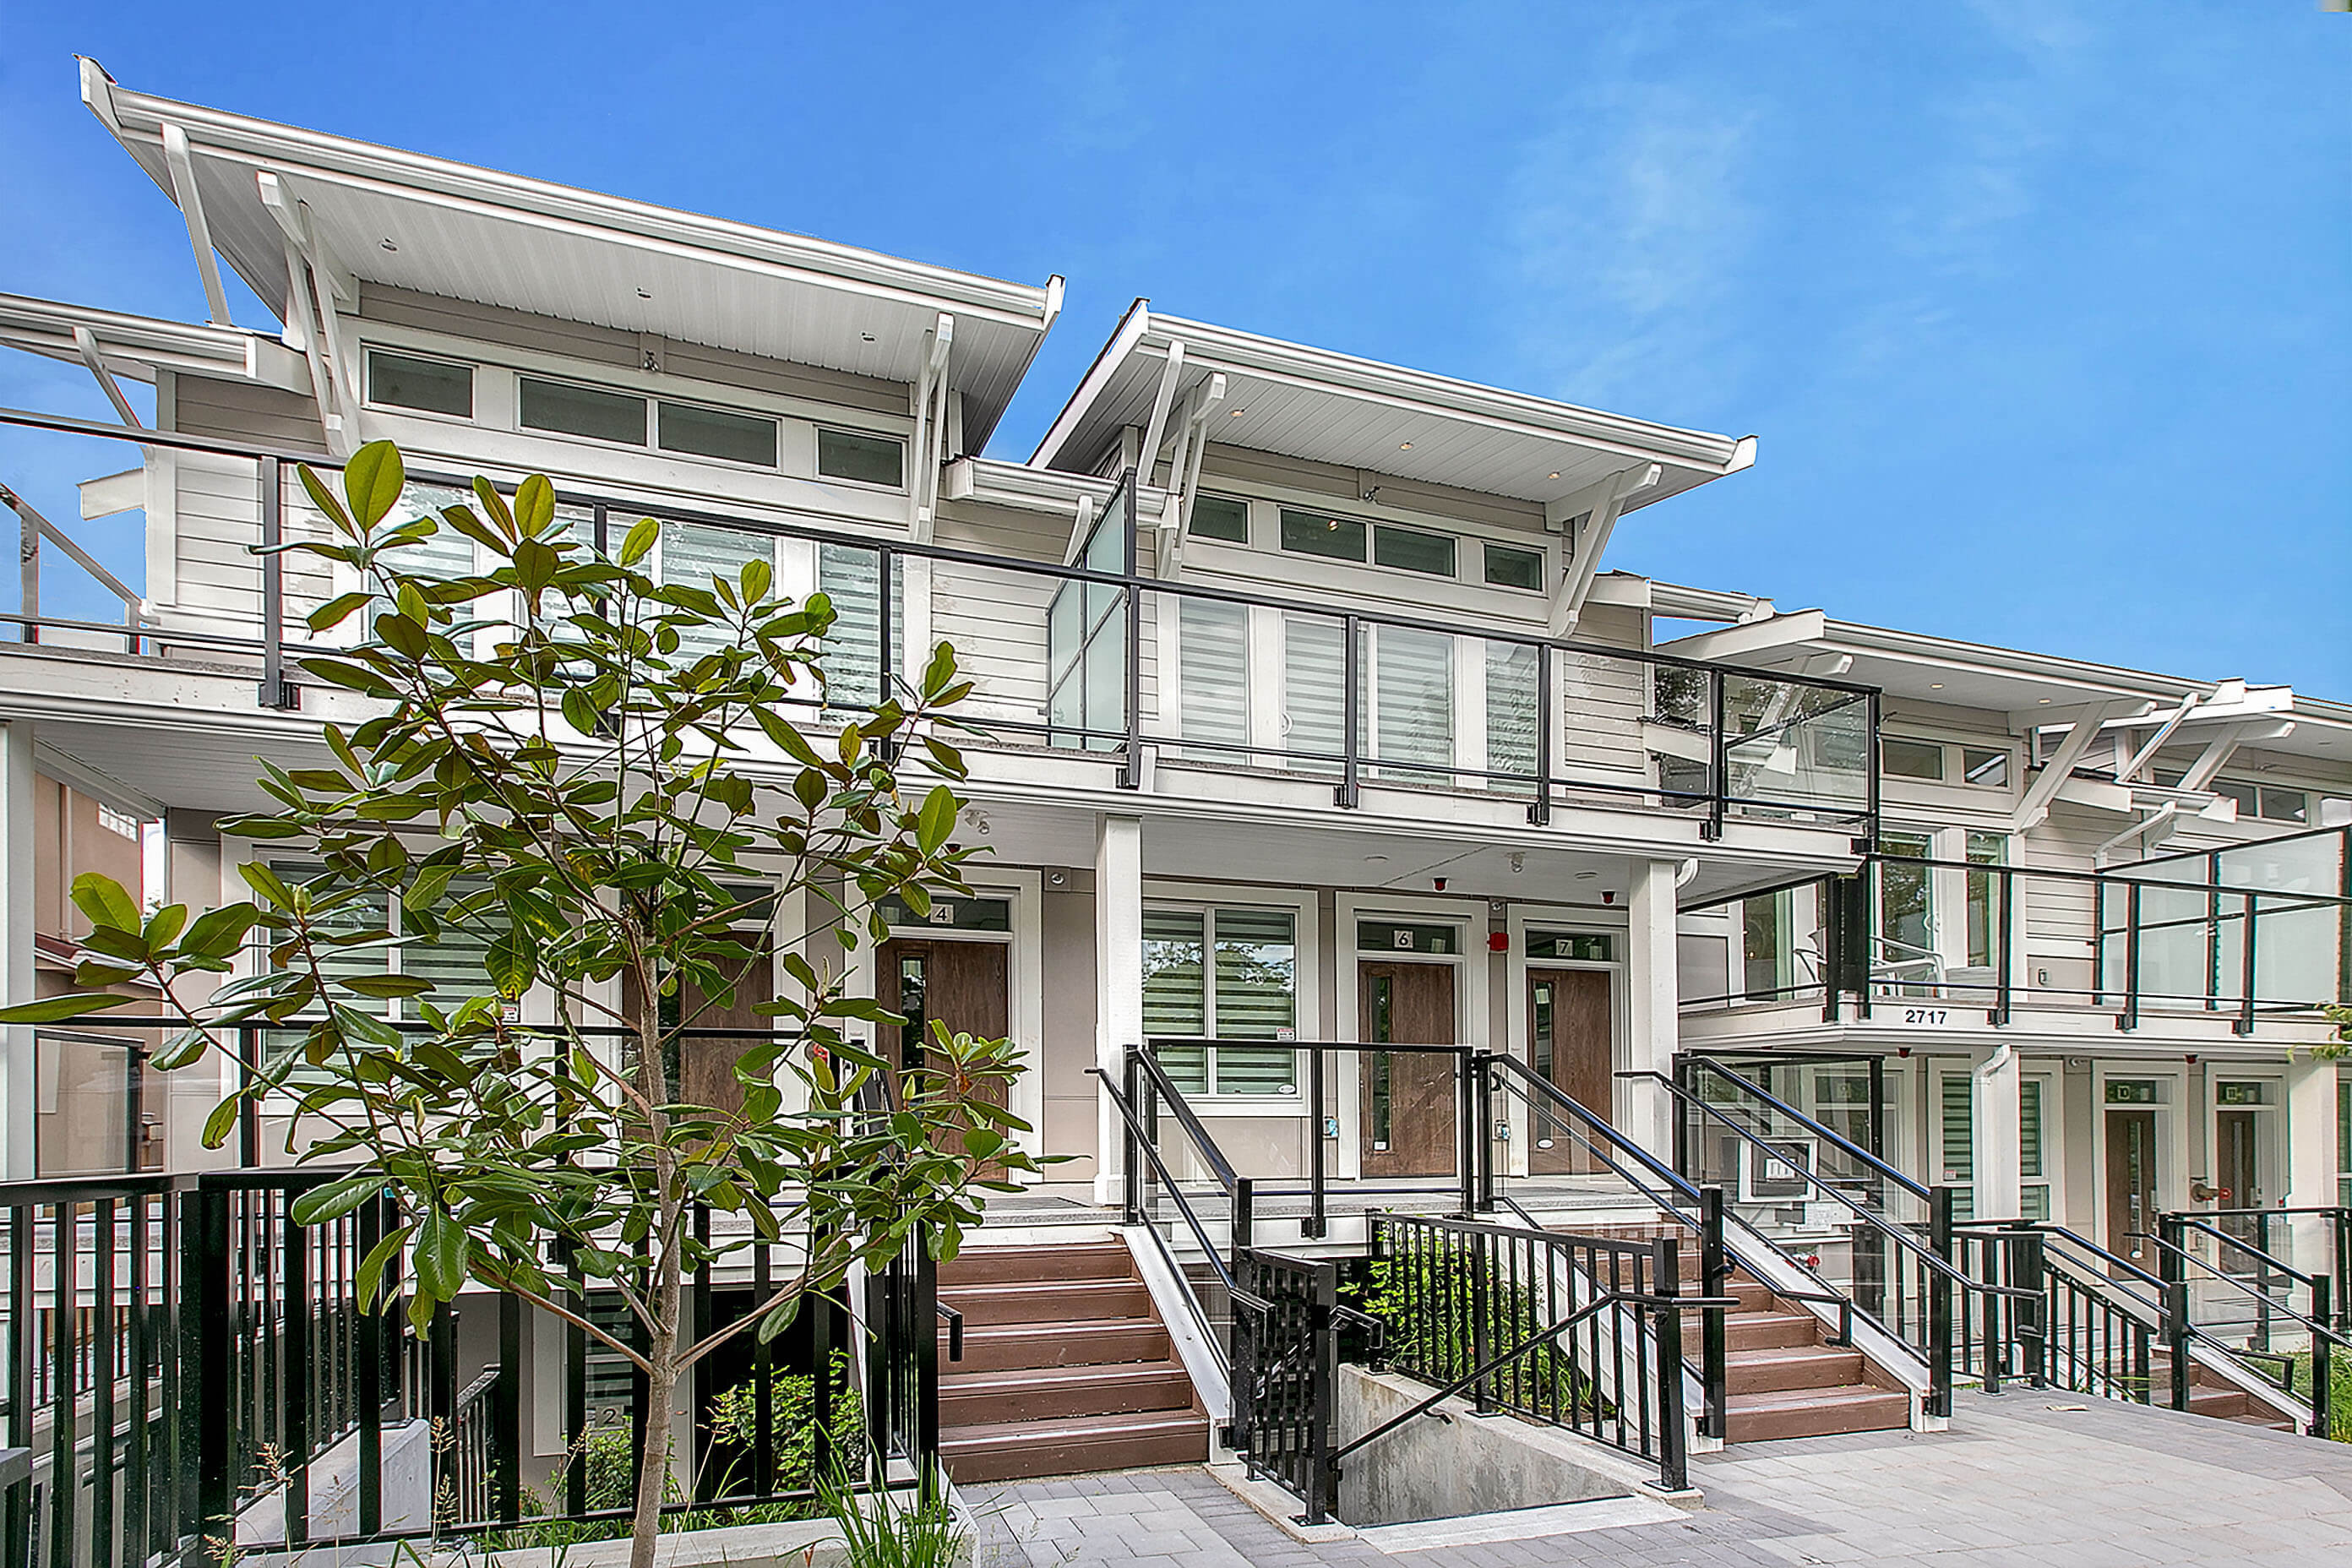 Building Exterior - 2717 Horley St, Vancouver, BC V5R 4R7, Canada!